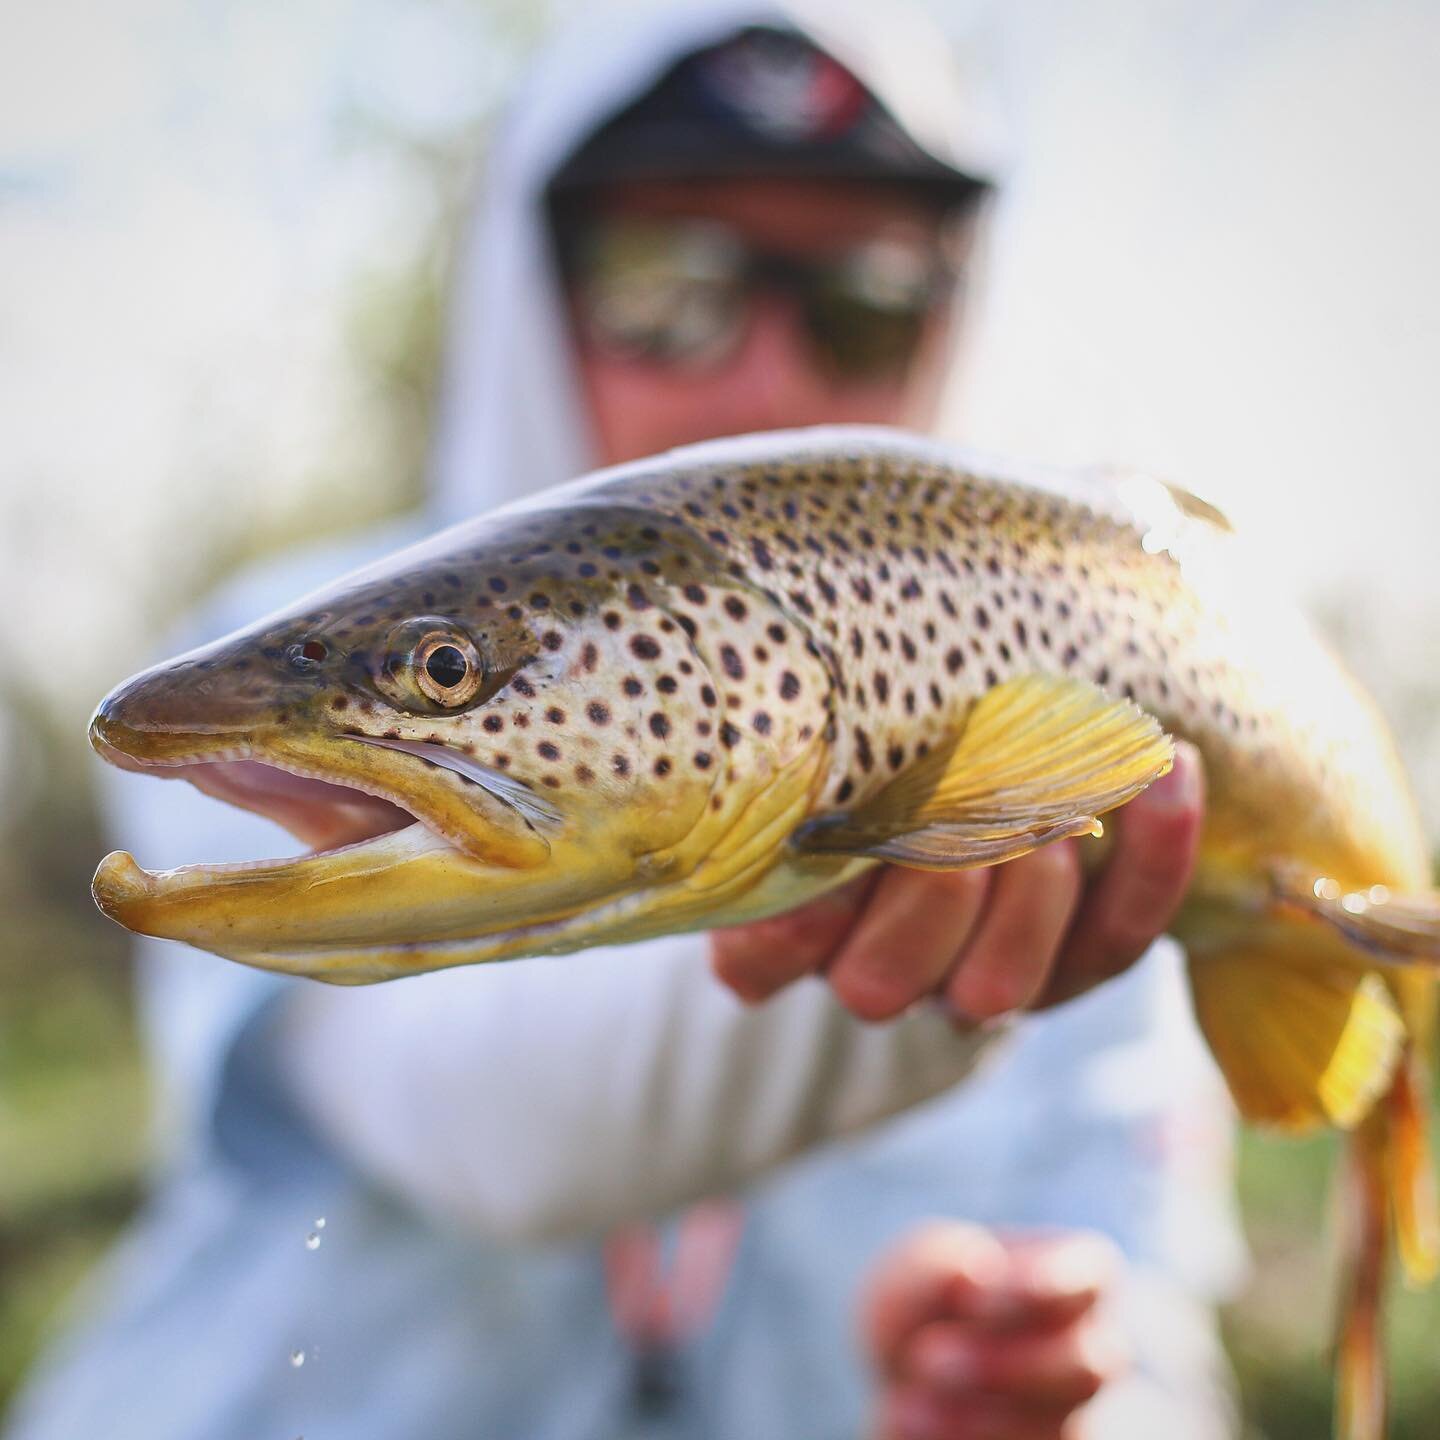 MEAT MOUTH. 
&bull;
&bull;
&bull;
📸: @unclecolepurswell 
&bull;
#riffletripoutfitters #scottflyrods #rossreels #tailwaters #browntown #bigfish #browntrout #onthefly #troutonthefly #troutporn #fishporn #anglerapproved #fisherman #flyfish #flyfishing 